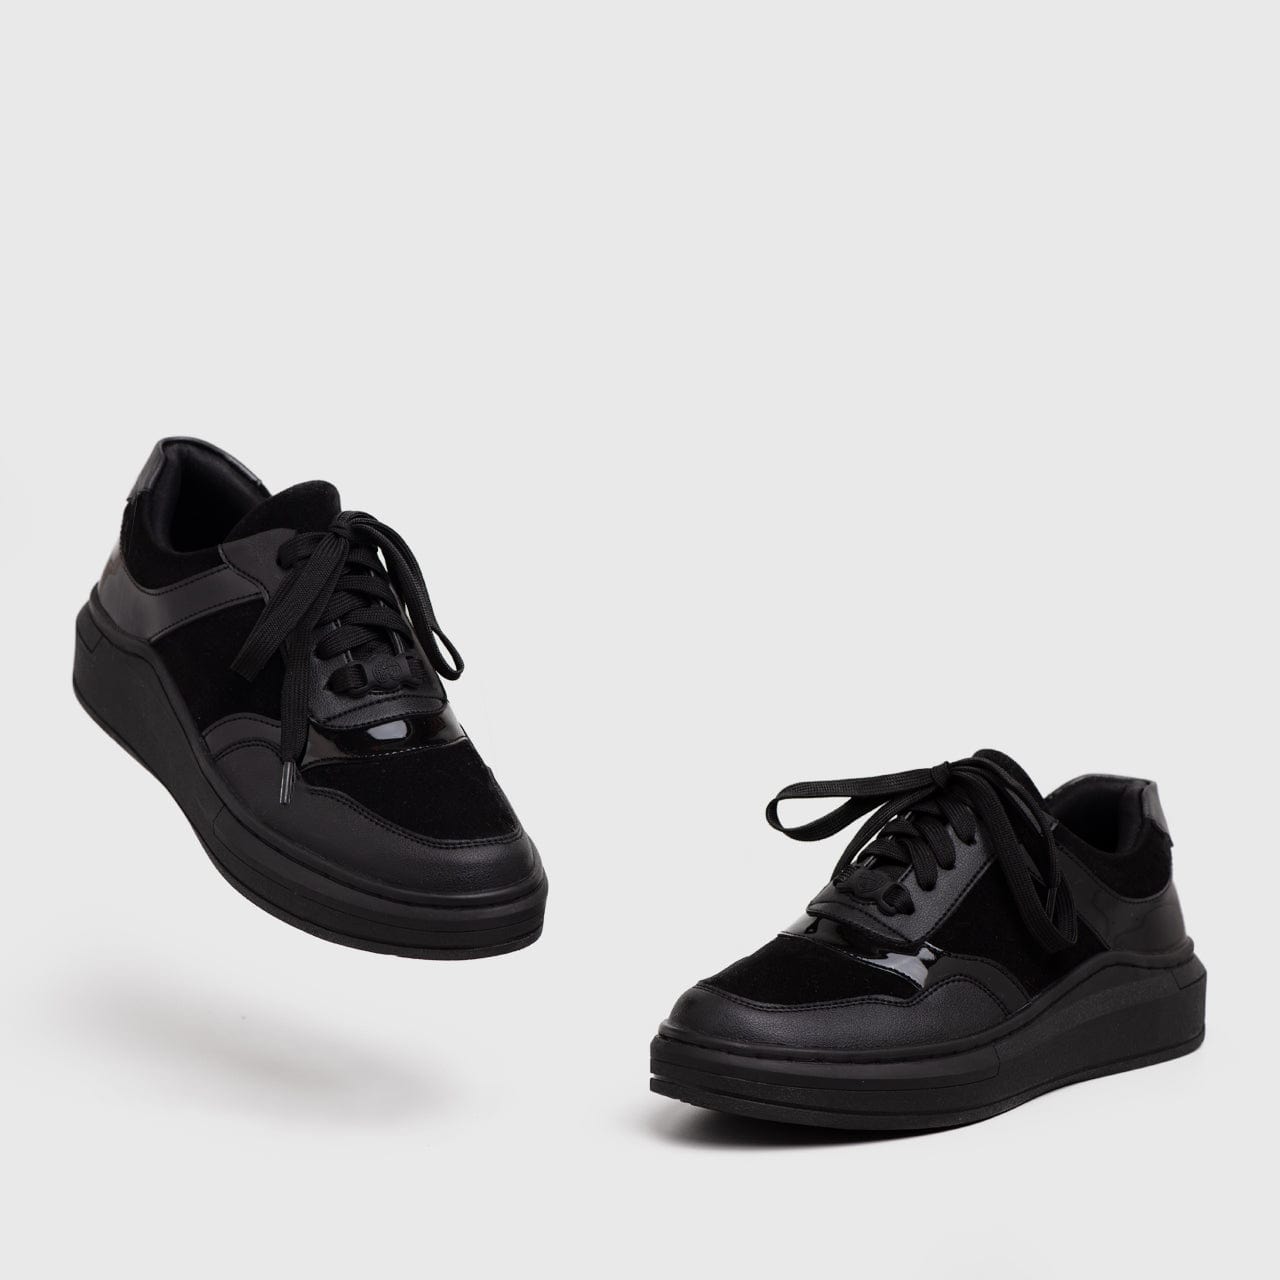 Adorable Projects Official Adorableprojects - Saldana Sneakers Black - Sneakers Hitam